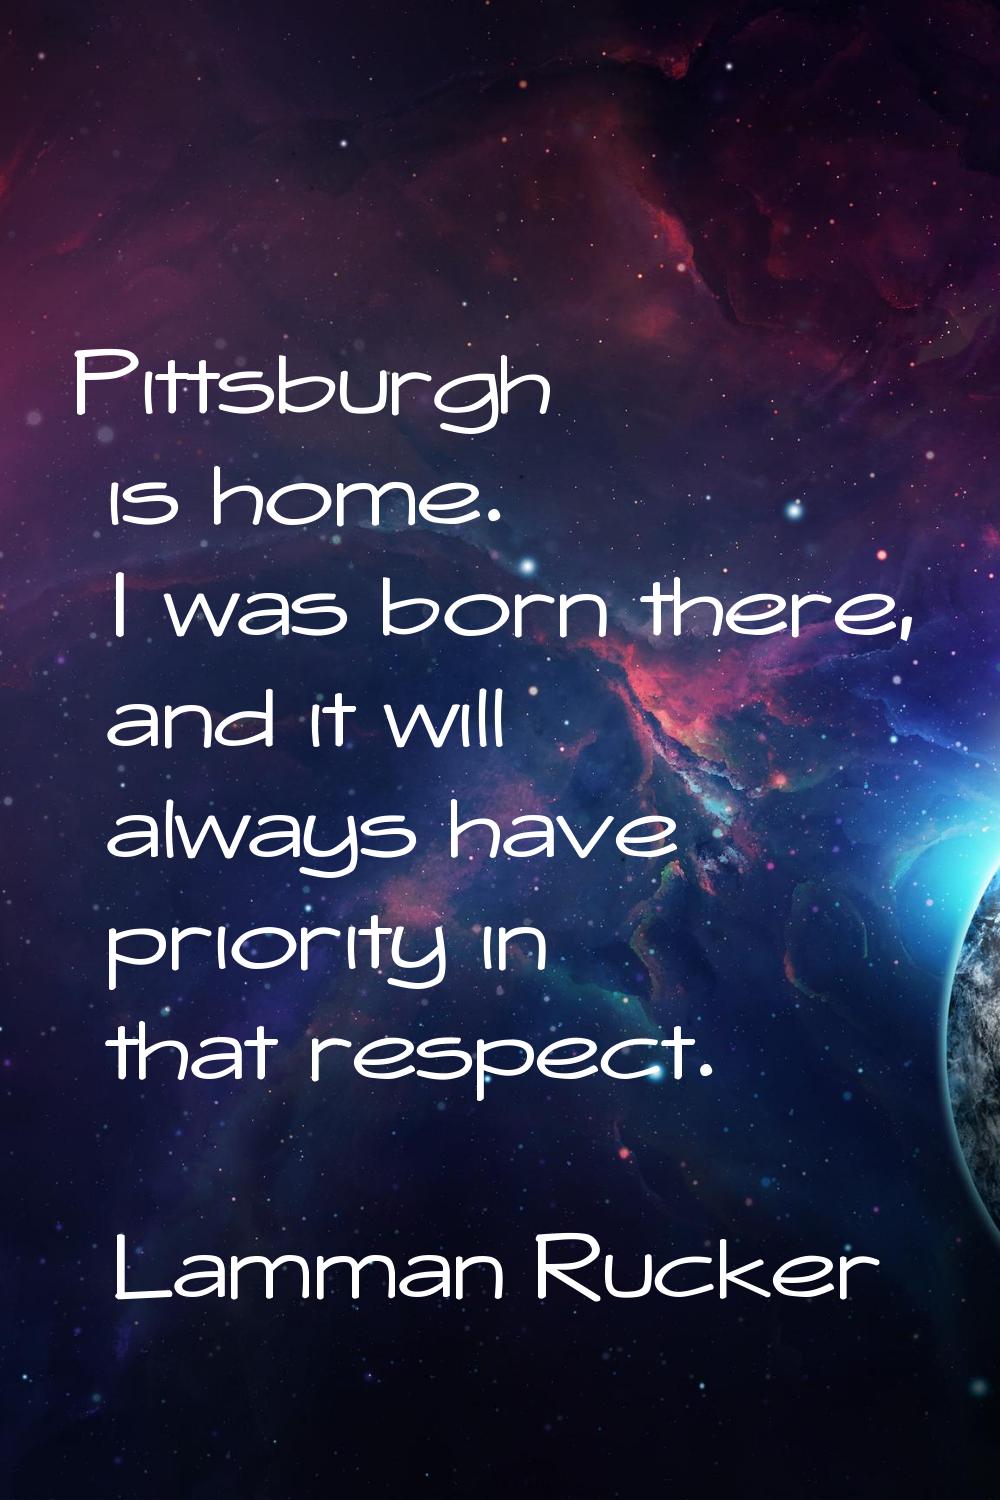 Pittsburgh is home. I was born there, and it will always have priority in that respect.